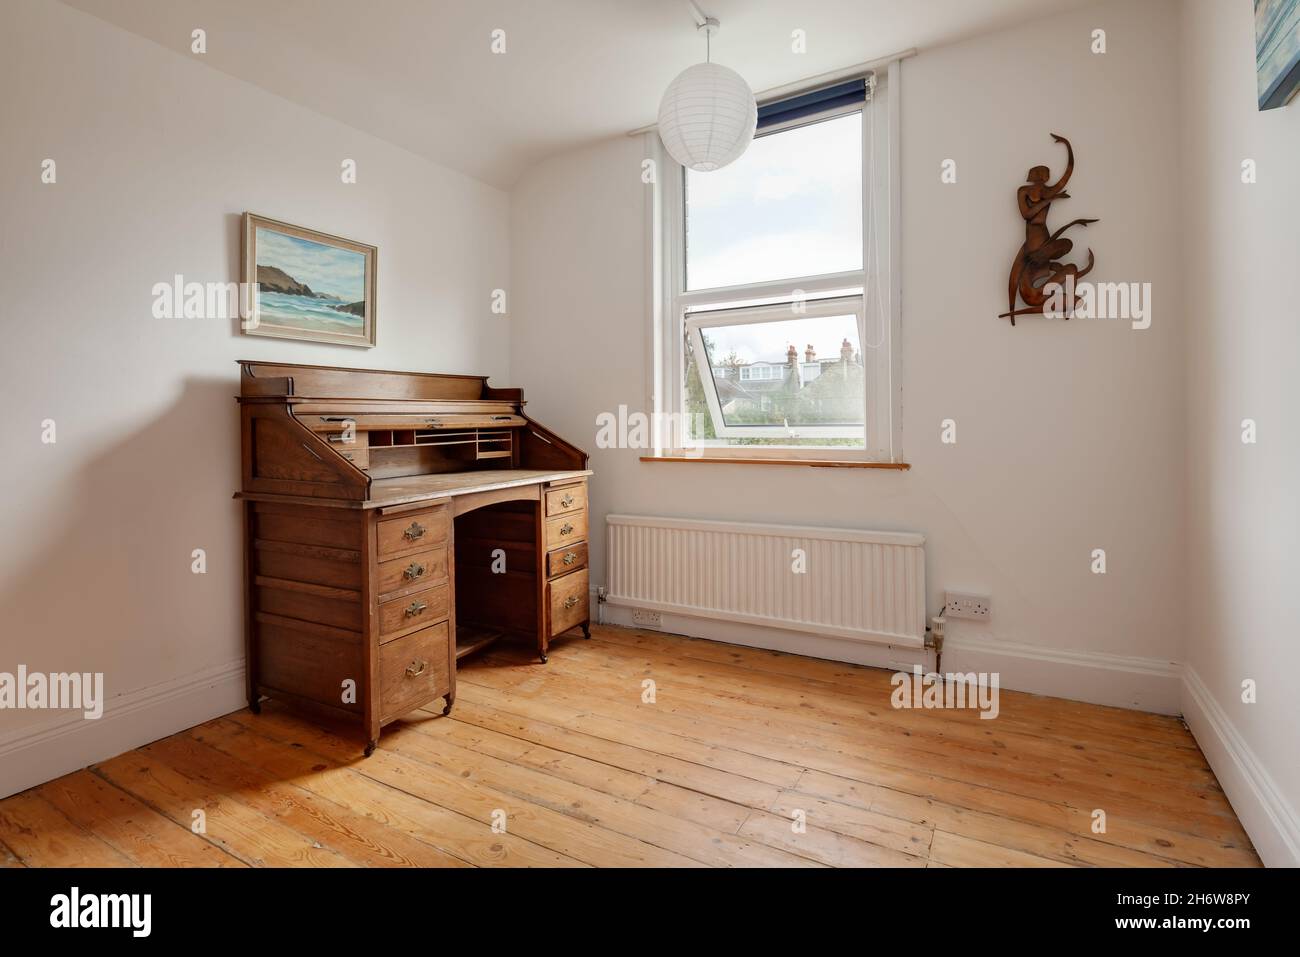 Cambridge, England - August 21 2019: Sparsely furnished room in Victorian era British home with traditional wooden bureau next to window. Stock Photo